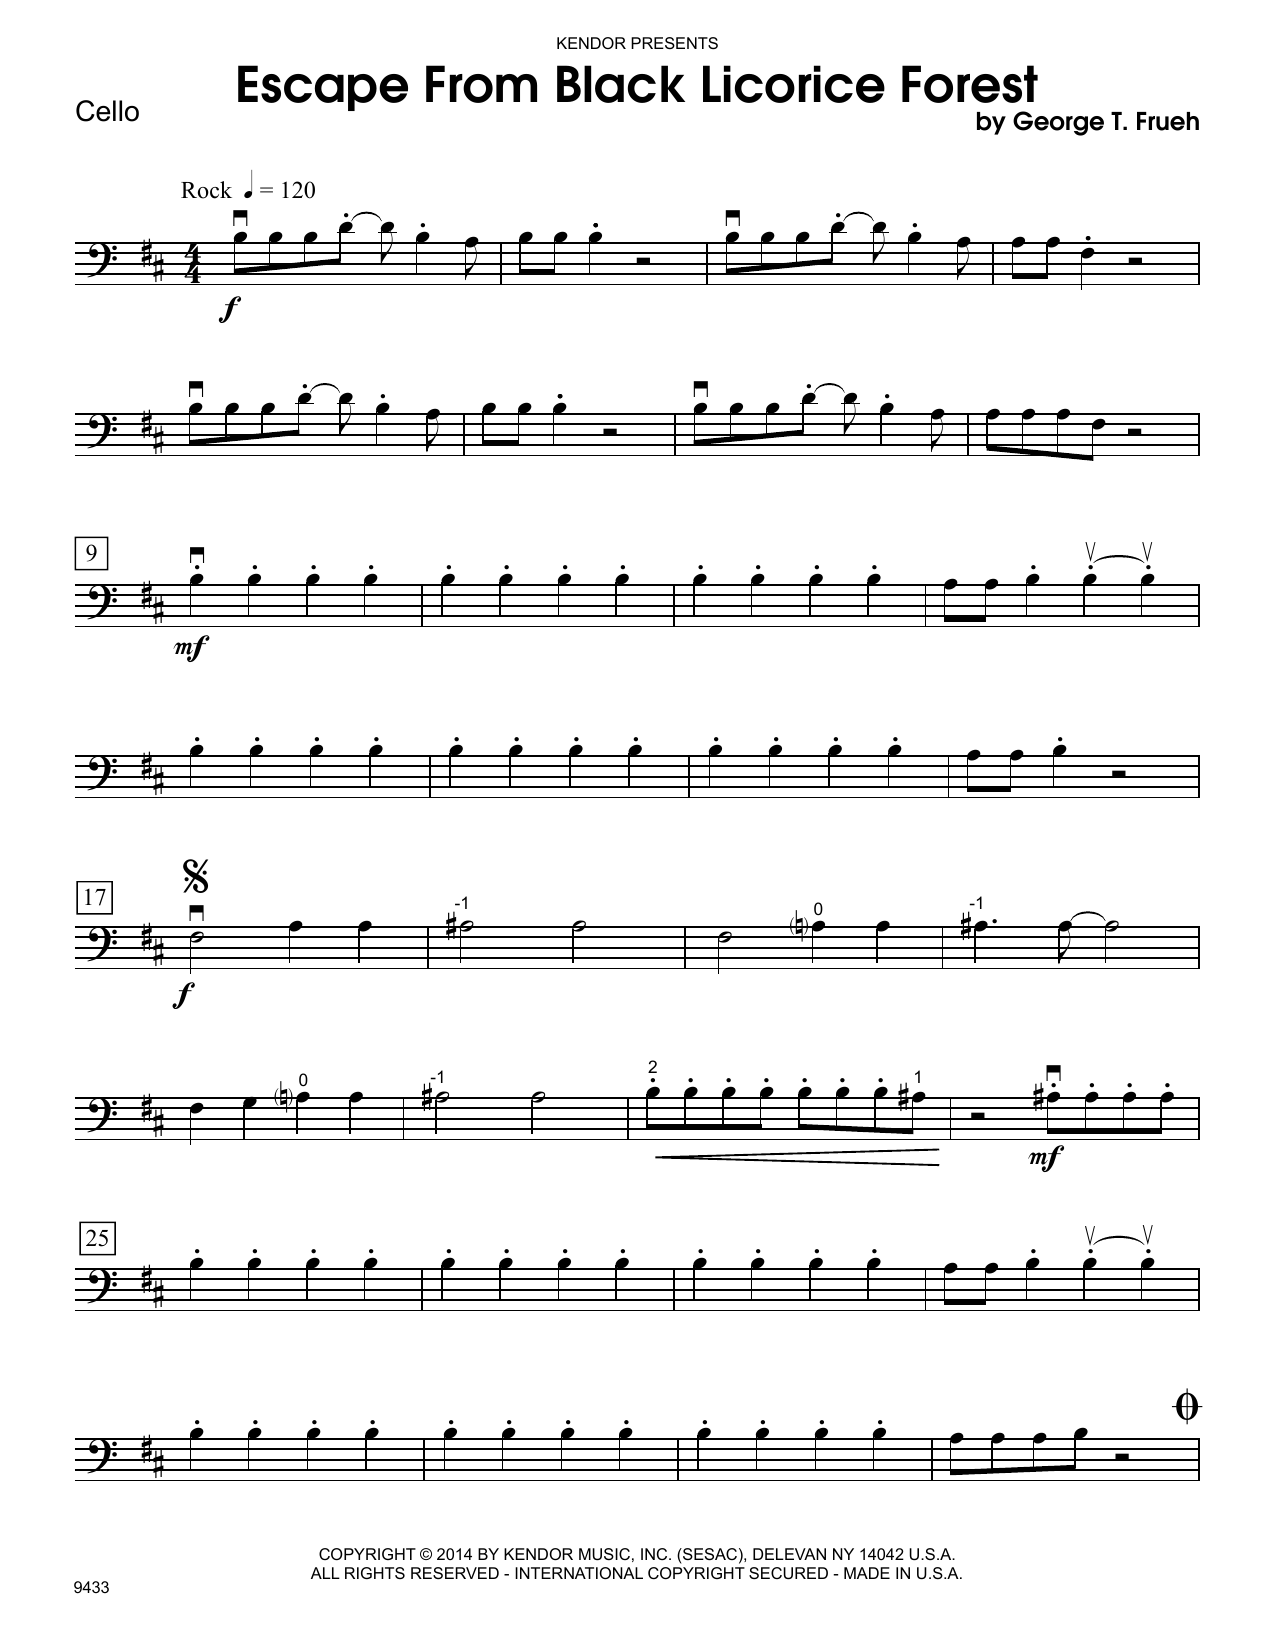 Download George T. Frueh Escape From Black Licorice Forest - Cel Sheet Music